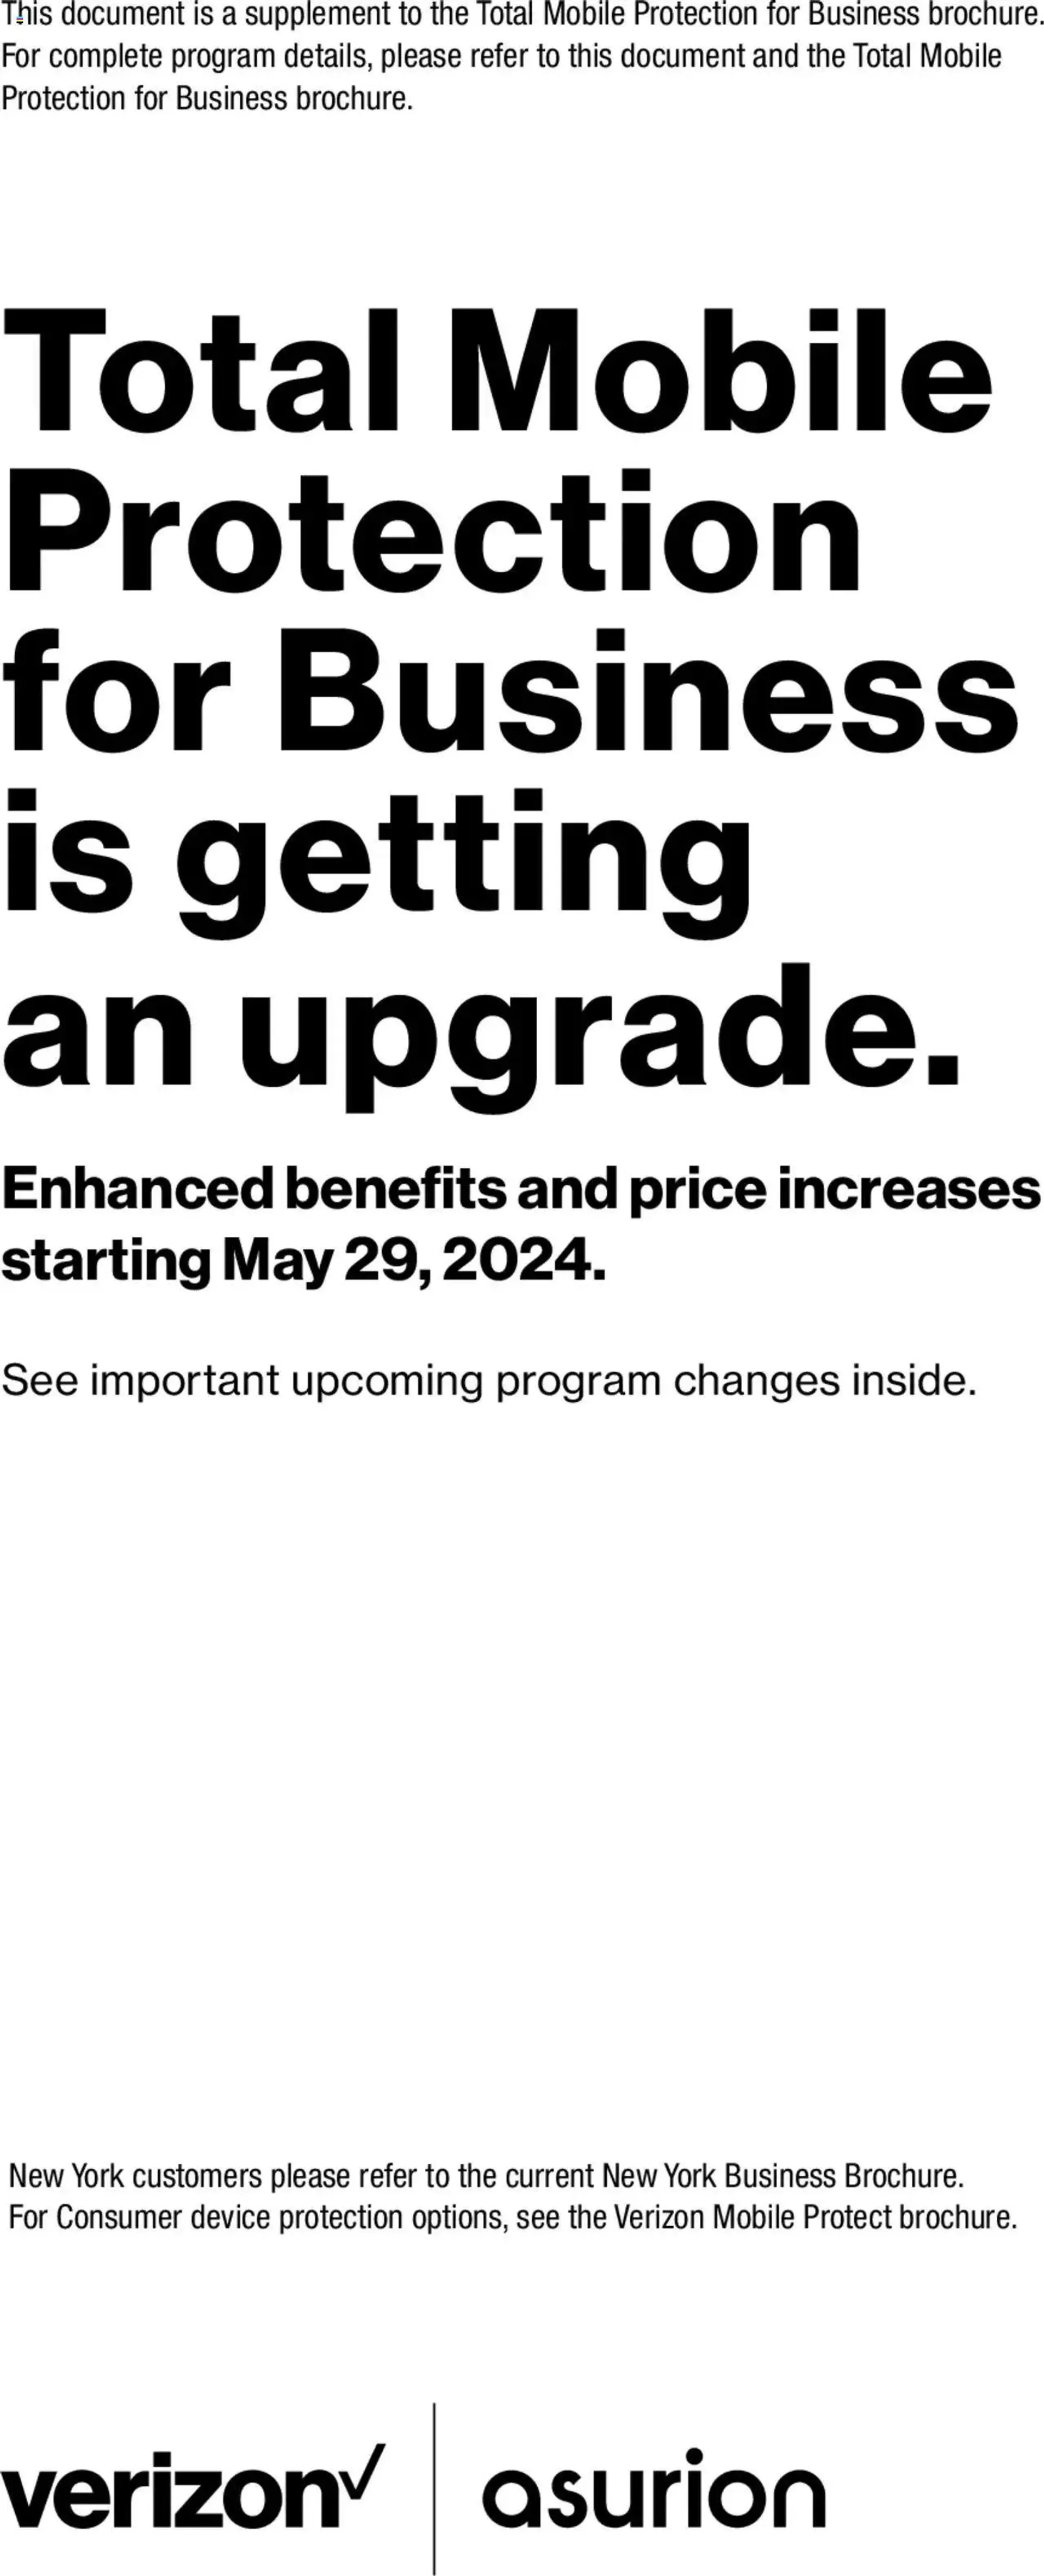 Weekly ad Verizon - Total Mobile Protection for Business is Getting an Upgrade from February 15 to December 31 2024 - Page 1